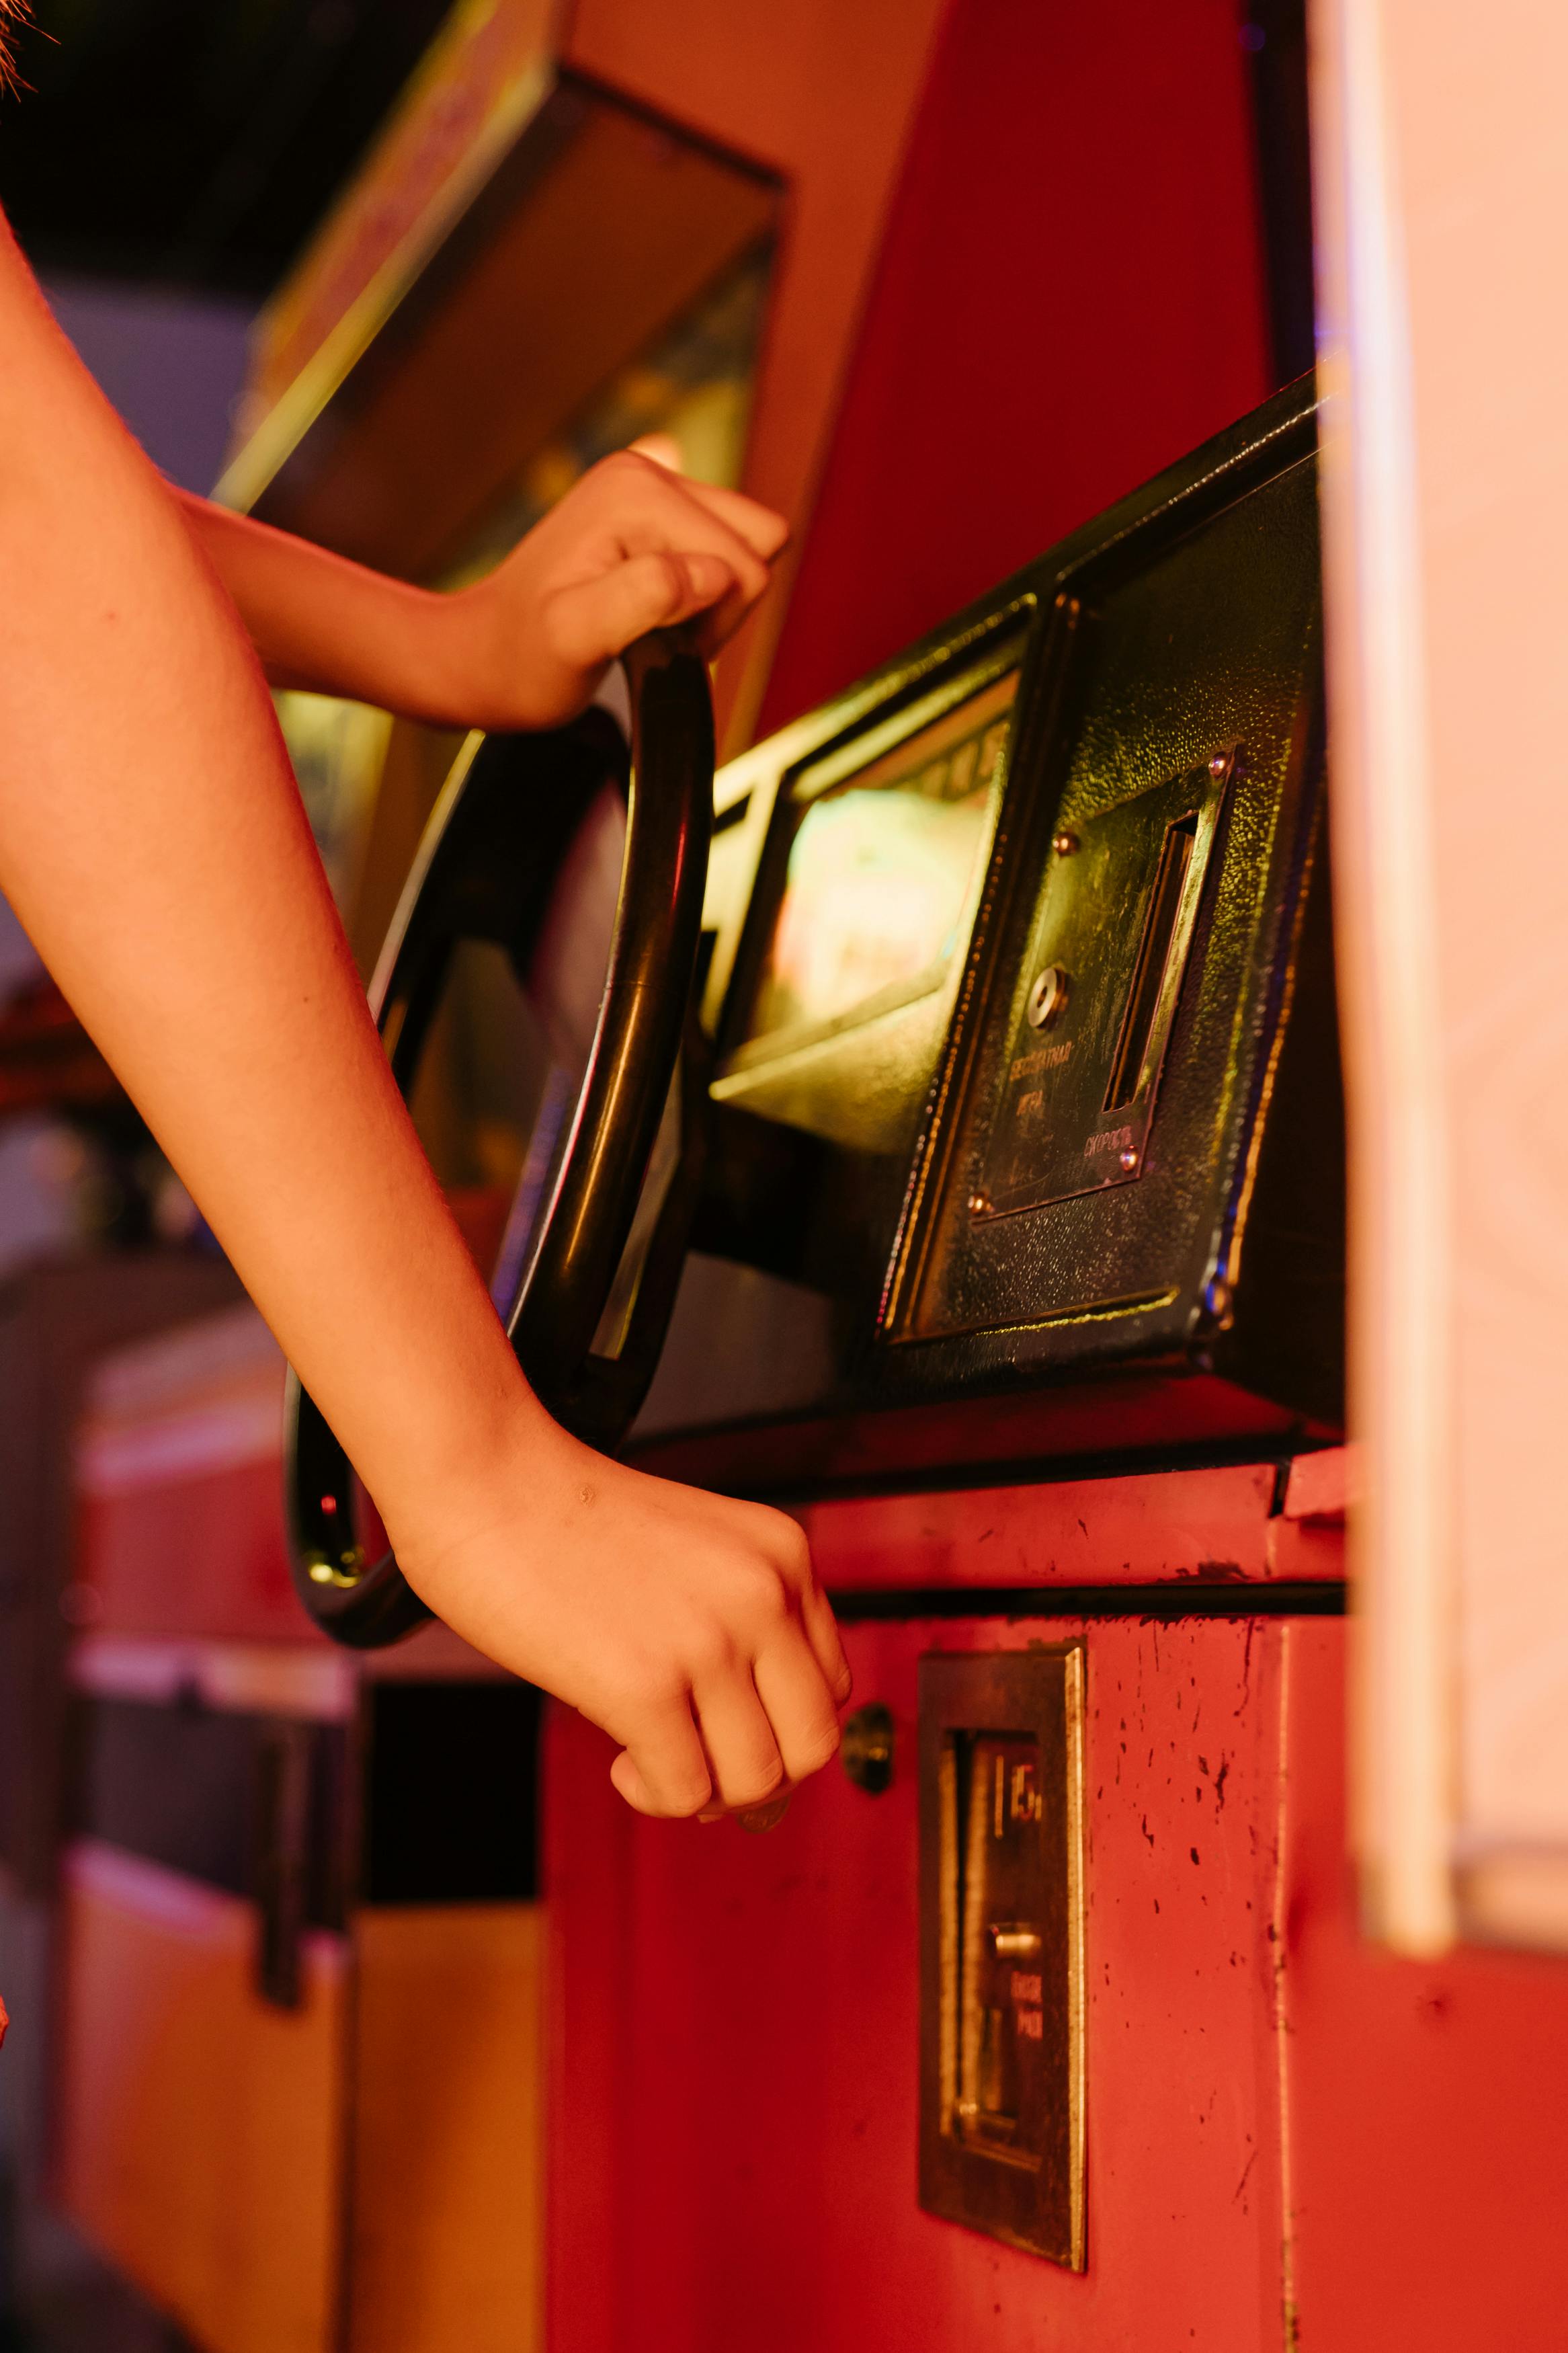 person playing an arcade machine